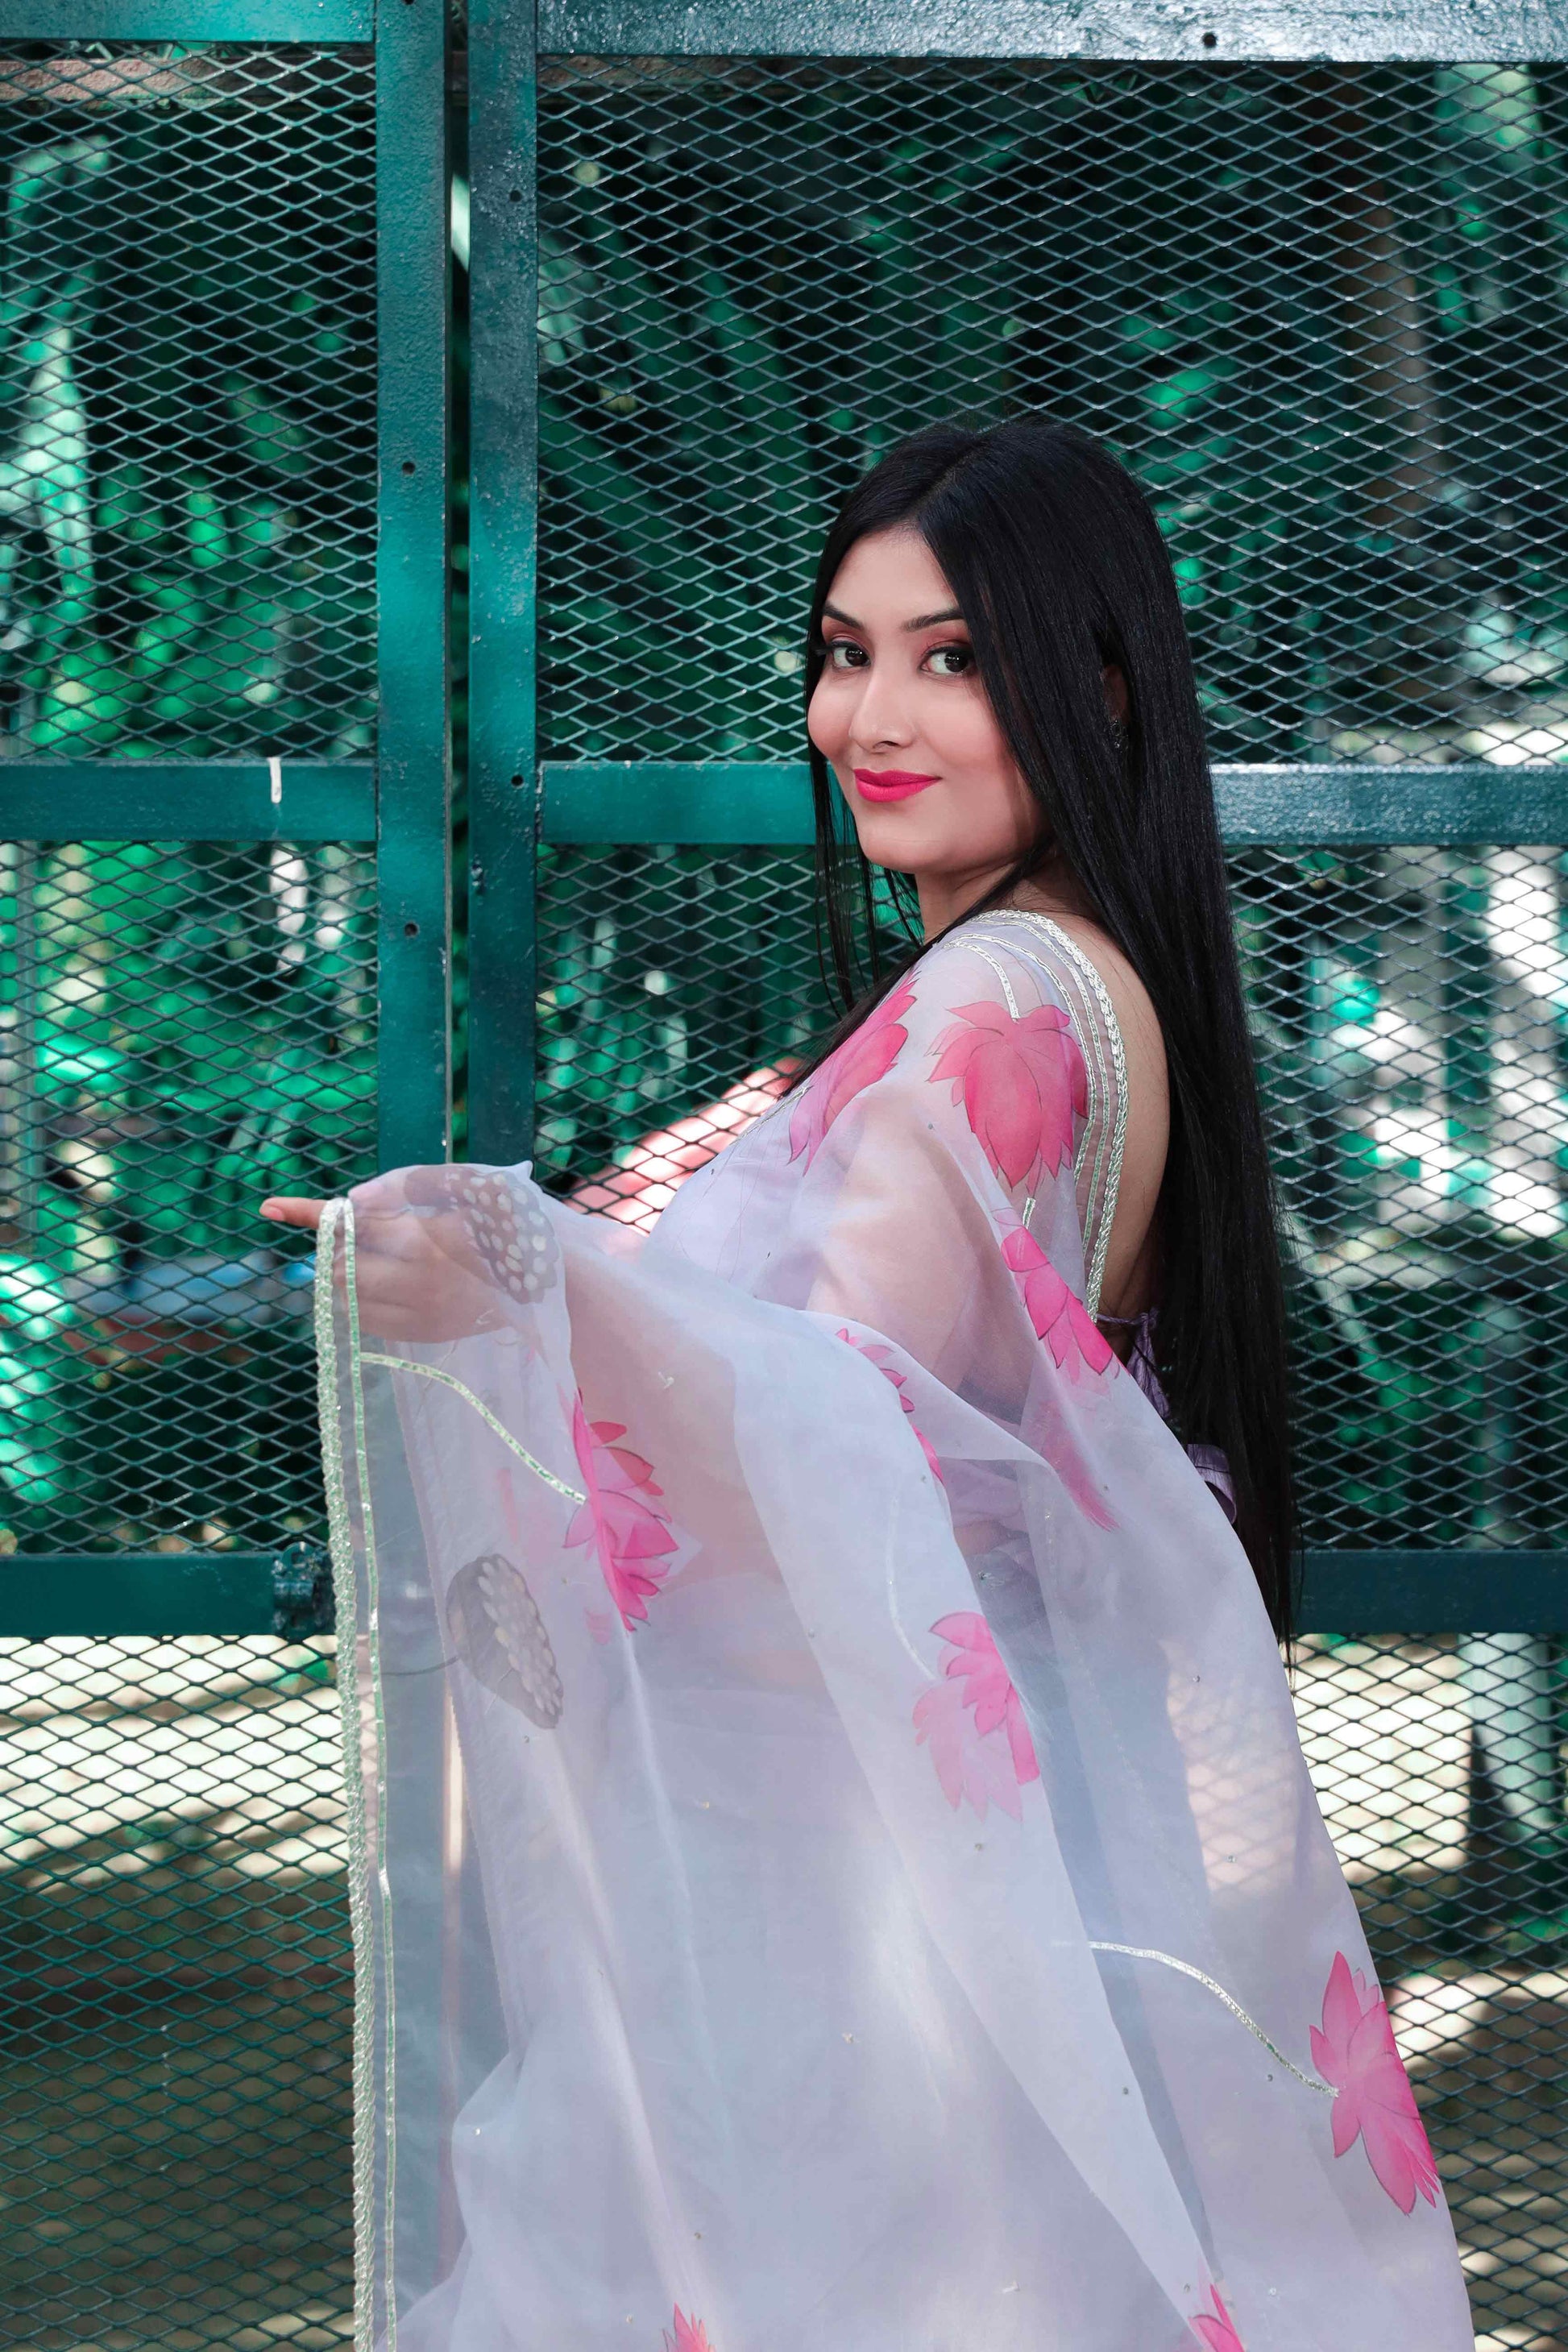 Grey Organza Saree Hand-Painted with Magenta Lotus Flowers and Gota Patti Embroidery - Perfect for Party Wear. Explore the Beauty of Hand-Painted Floral Organza Sarees and Unique Saree Designs. Ideal for an Elegant Organza Saree Look with Intricate Hand Painting